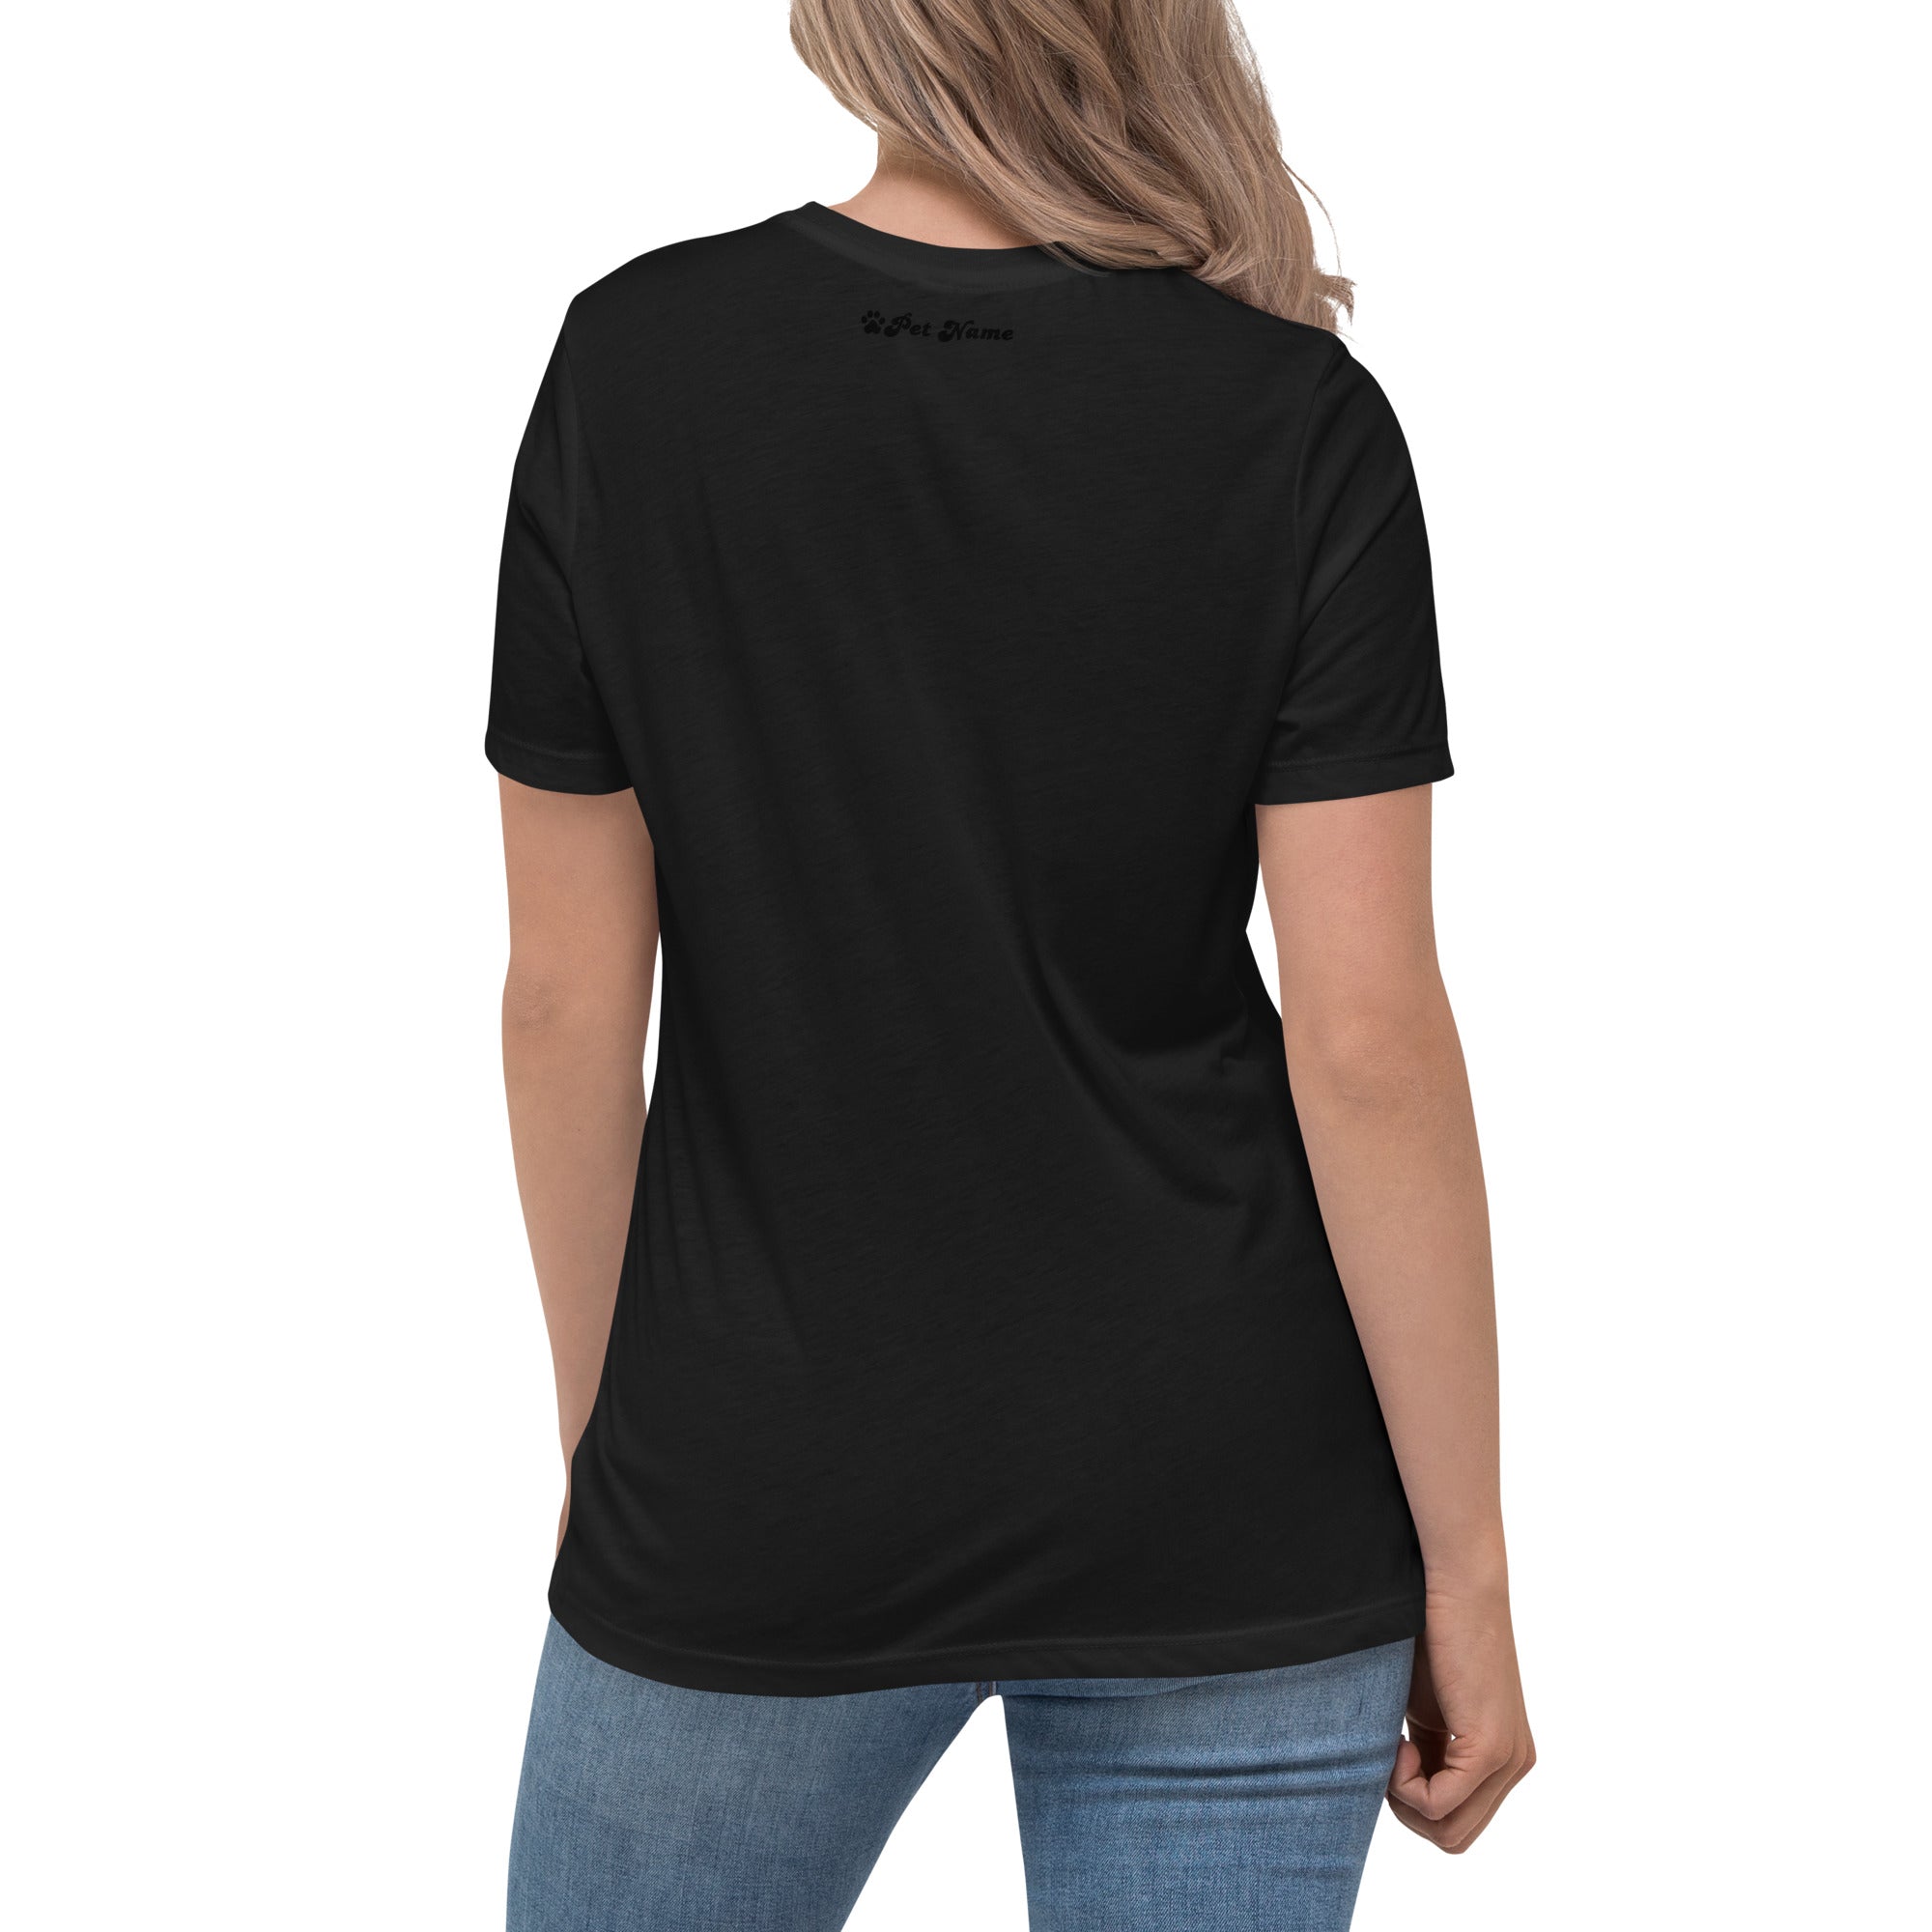 American Staffordshire Bull Women's Relaxed T-Shirt